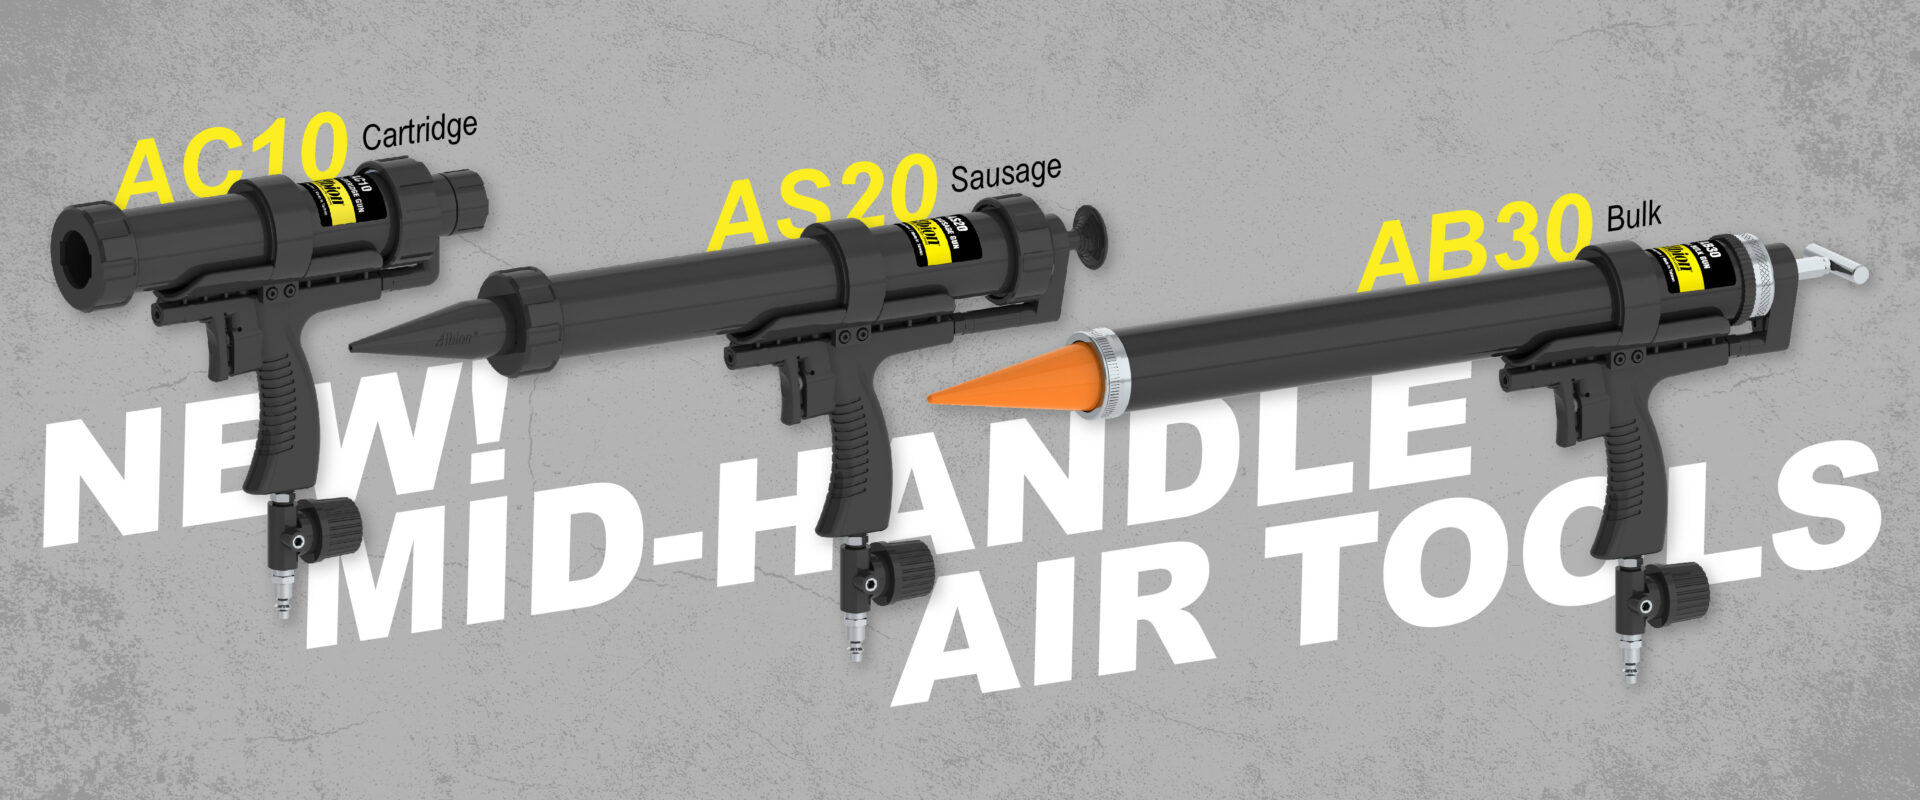 Albion Engineering's New Mid-Handle Air Tools